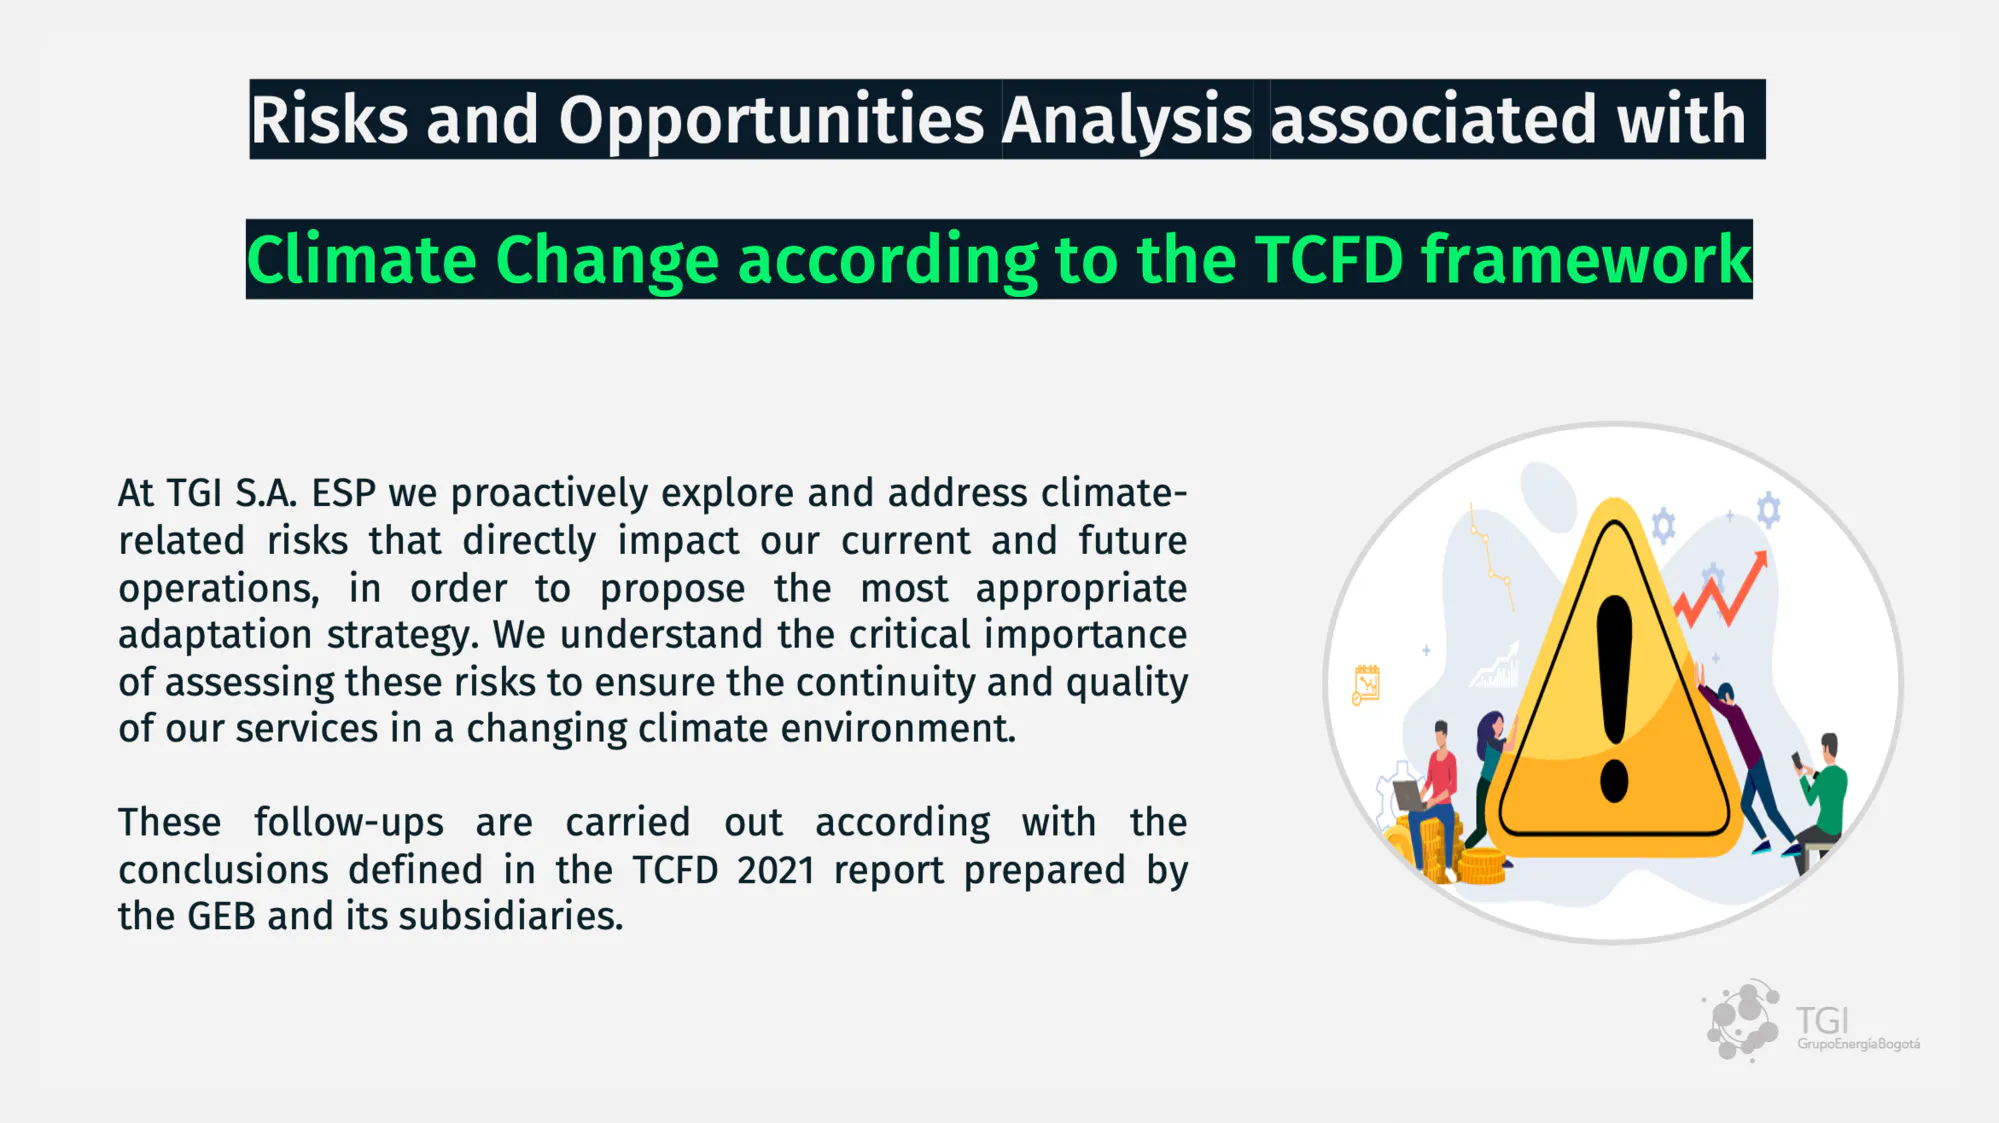 1Risks and Opportunities Analysis associated with Climate Change according to the TCFD framework.png